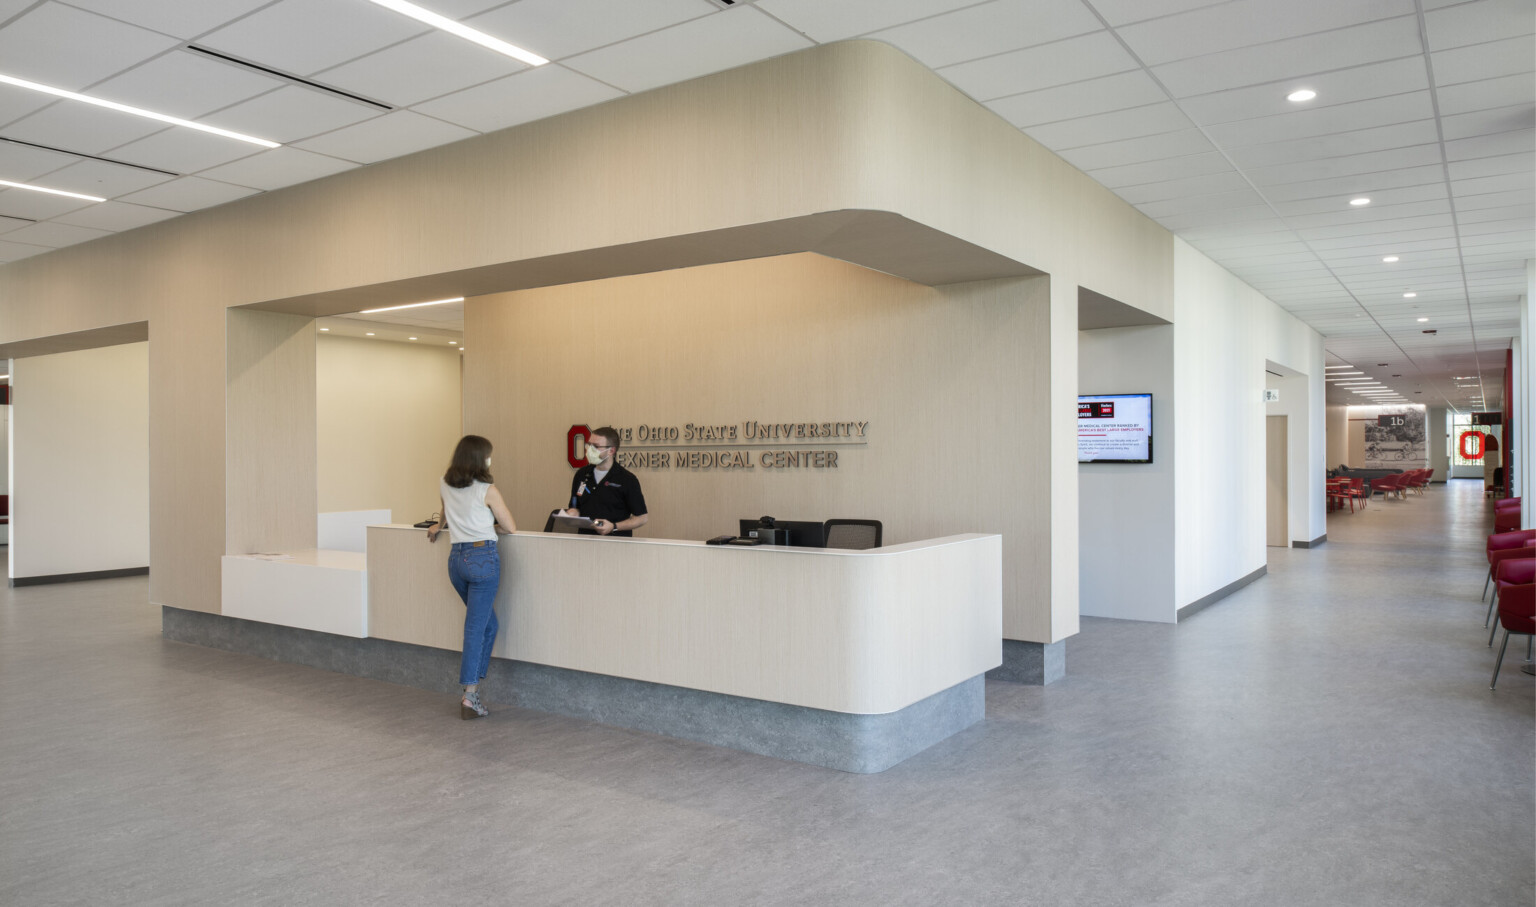 Entry reception desk in medical center, beige desk matches wall colors, grey base matches floors, white panel ceiling